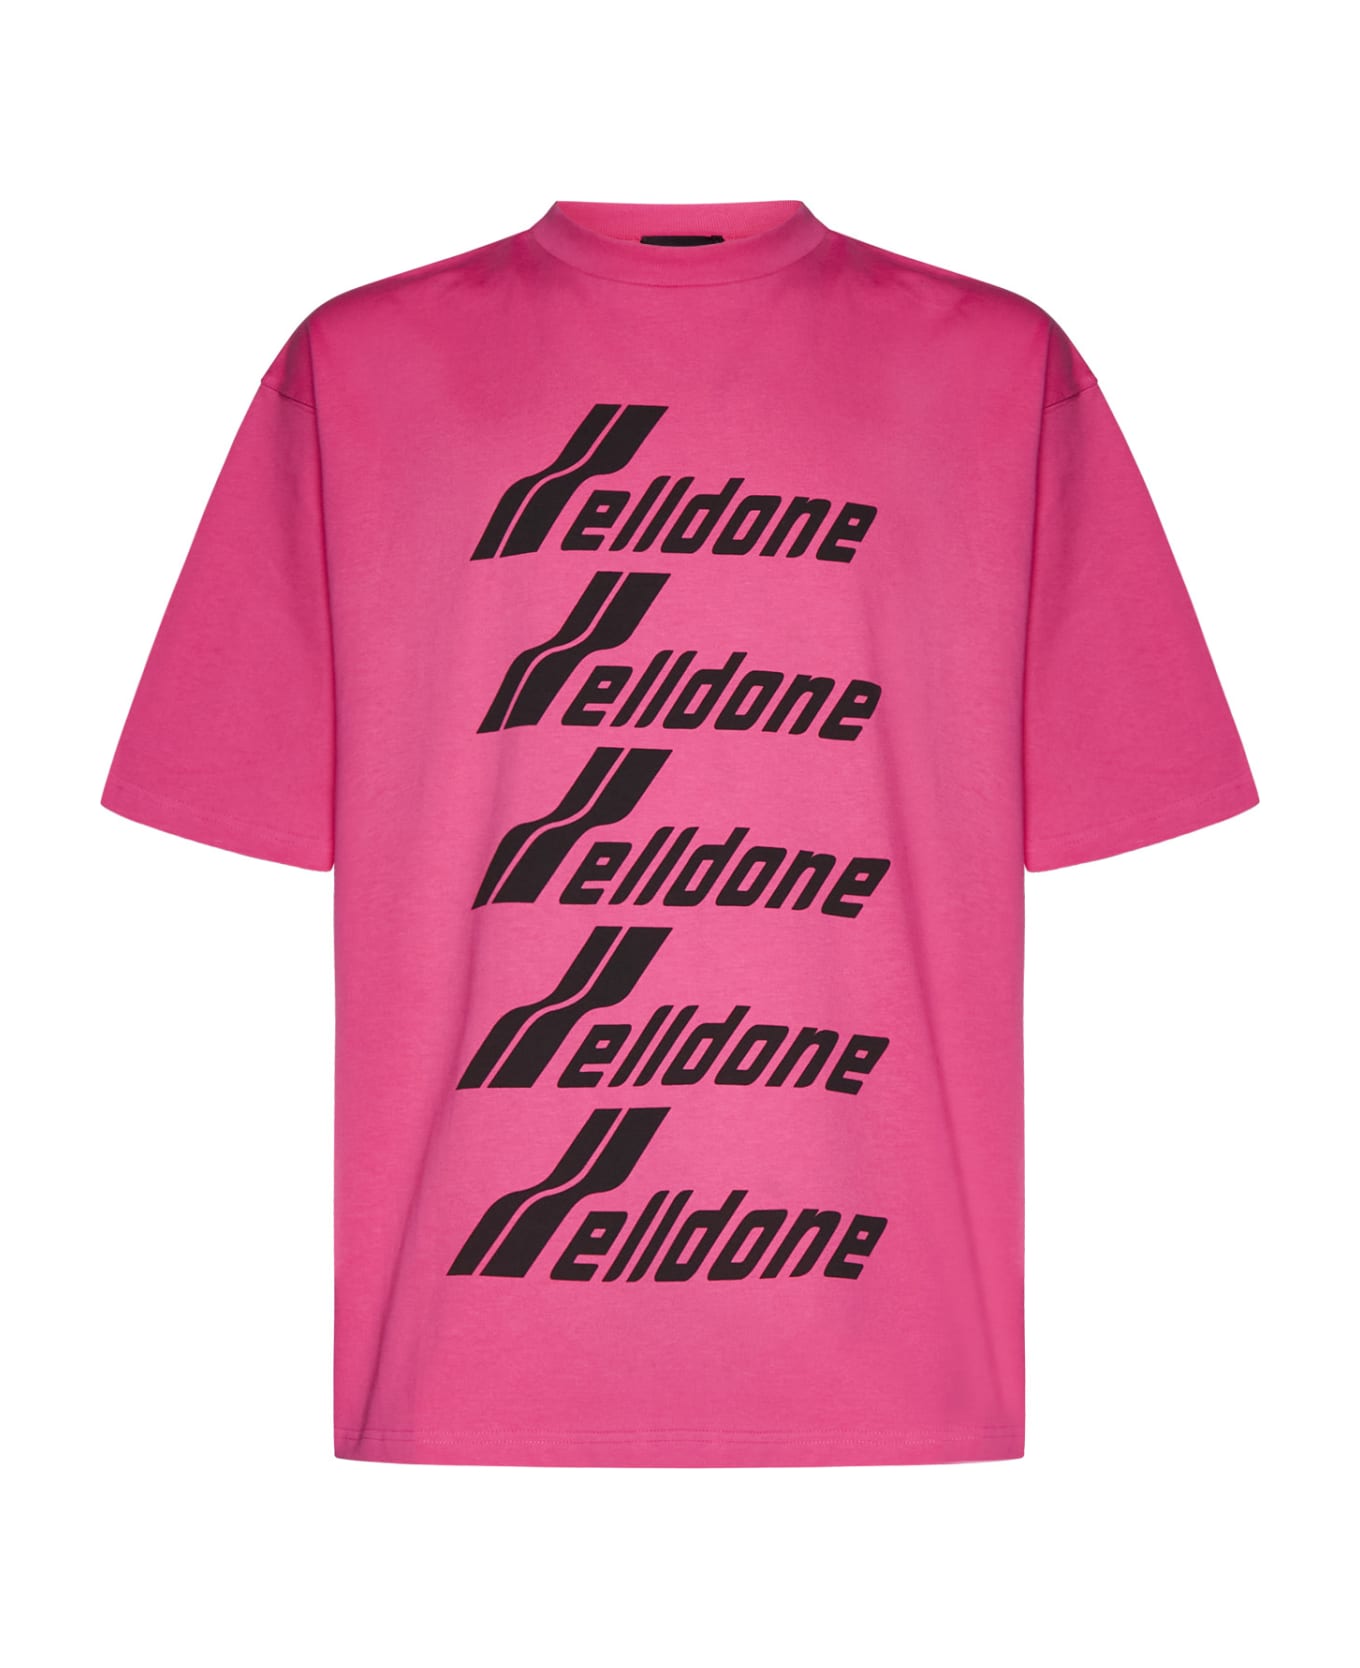 WE11 DONE T-Shirt - Pink